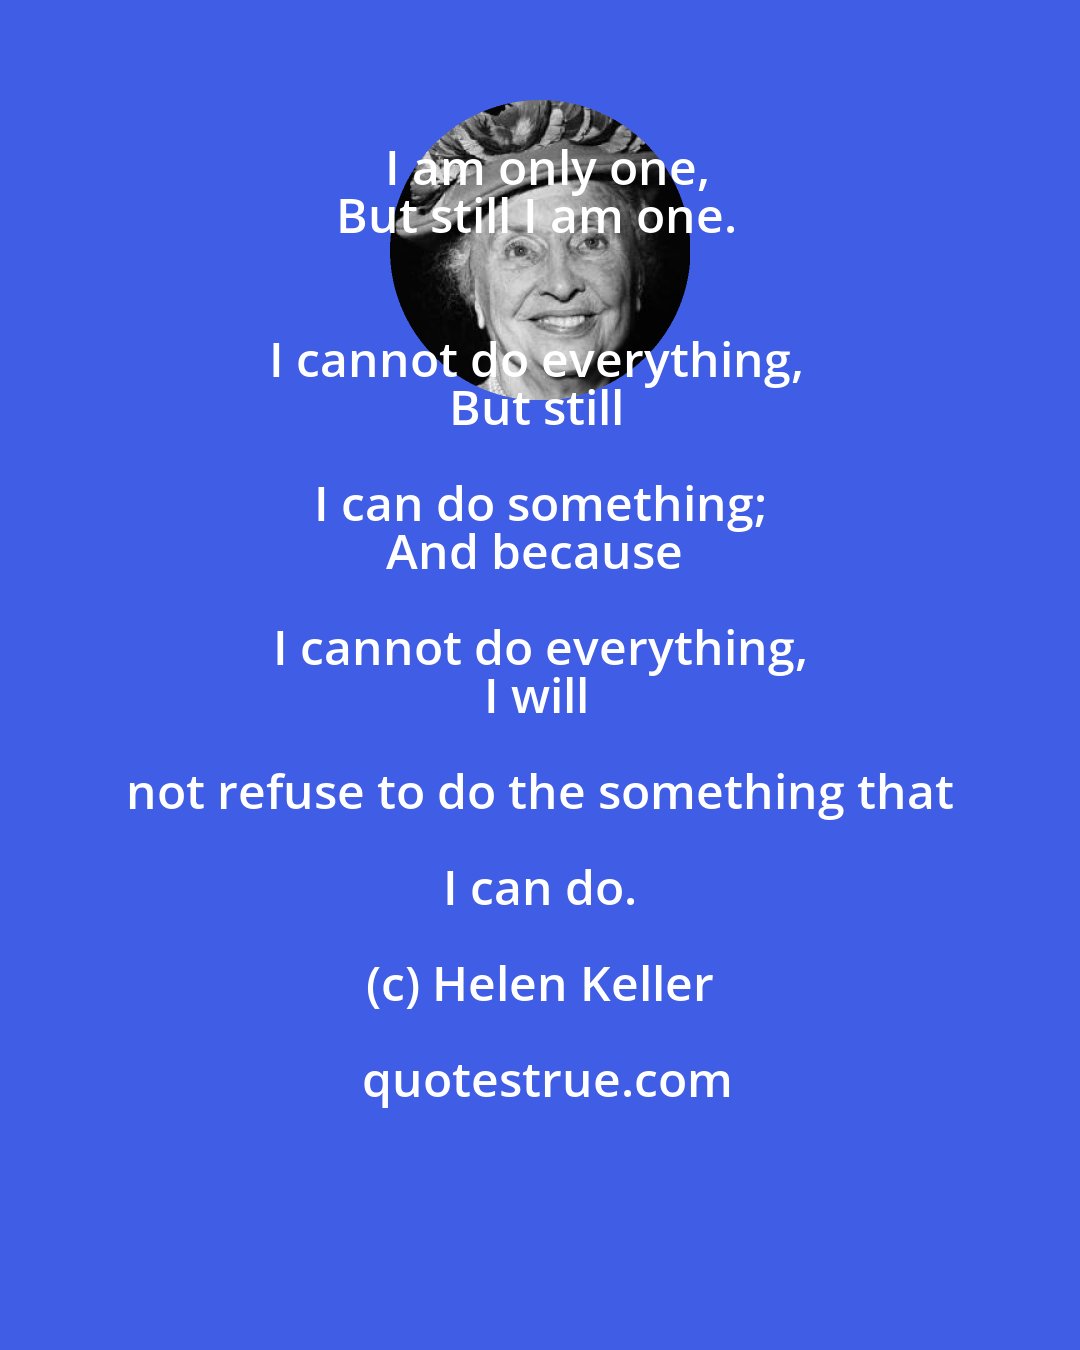 Helen Keller: I am only one,
But still I am one. 
I cannot do everything, 
But still I can do something; 
And because I cannot do everything, 
I will not refuse to do the something that I can do.